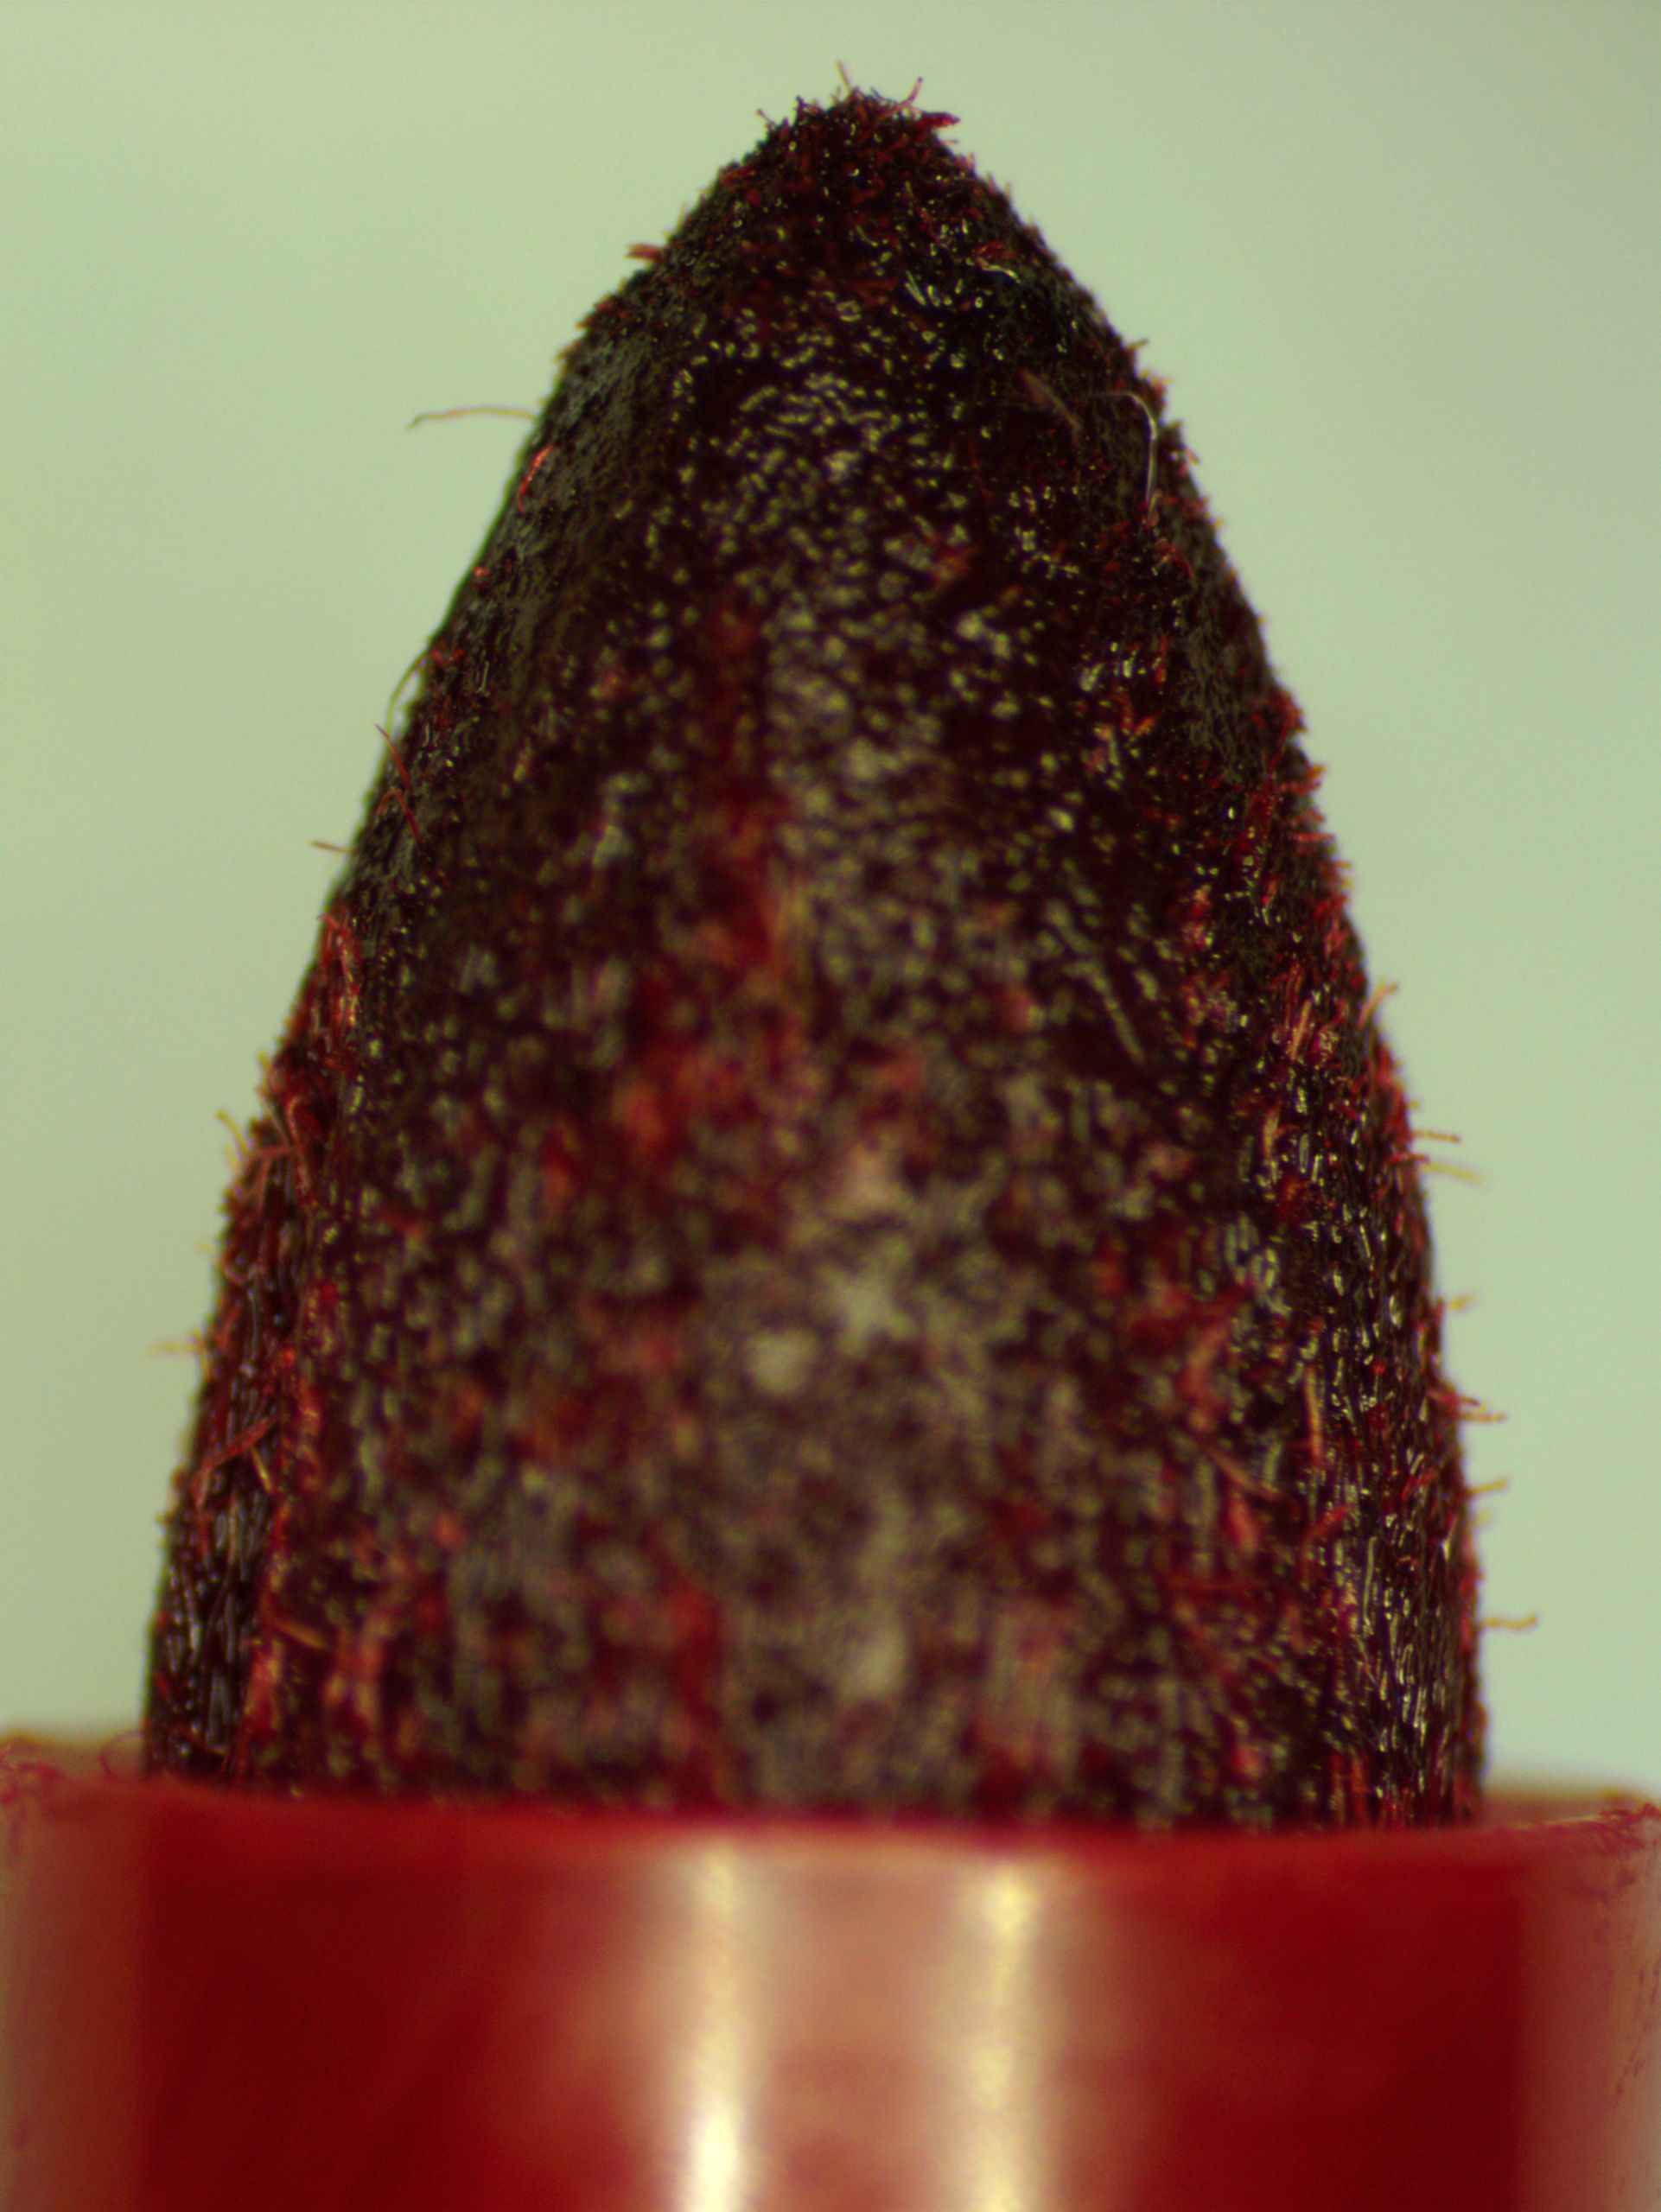 The tip of a red sharpie